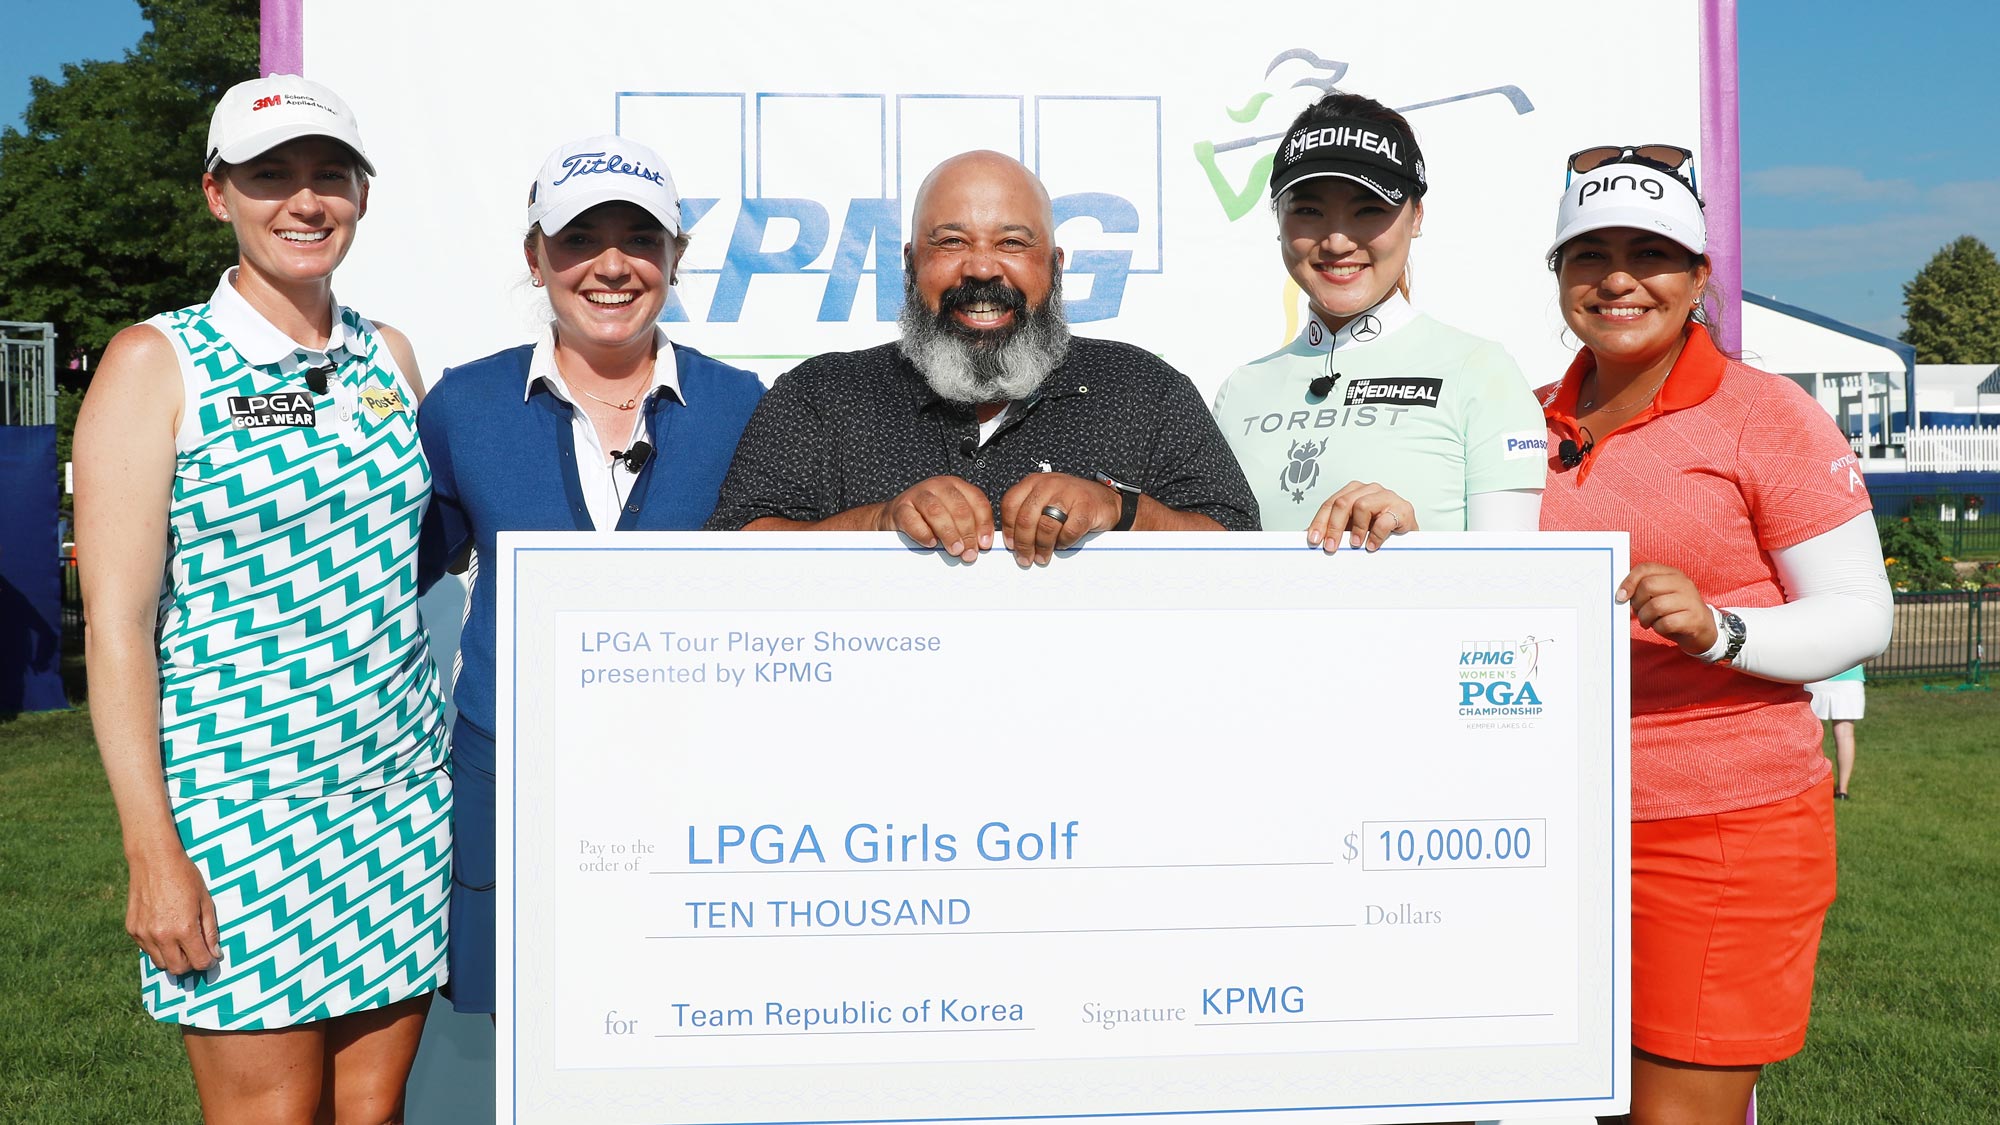 (Left to right) Sarah Jane Smith, Bronte Law, ESPN's Michael Collins, So Yeon Ryu and Lizette Salas pose after the KPMG Skills Challenge